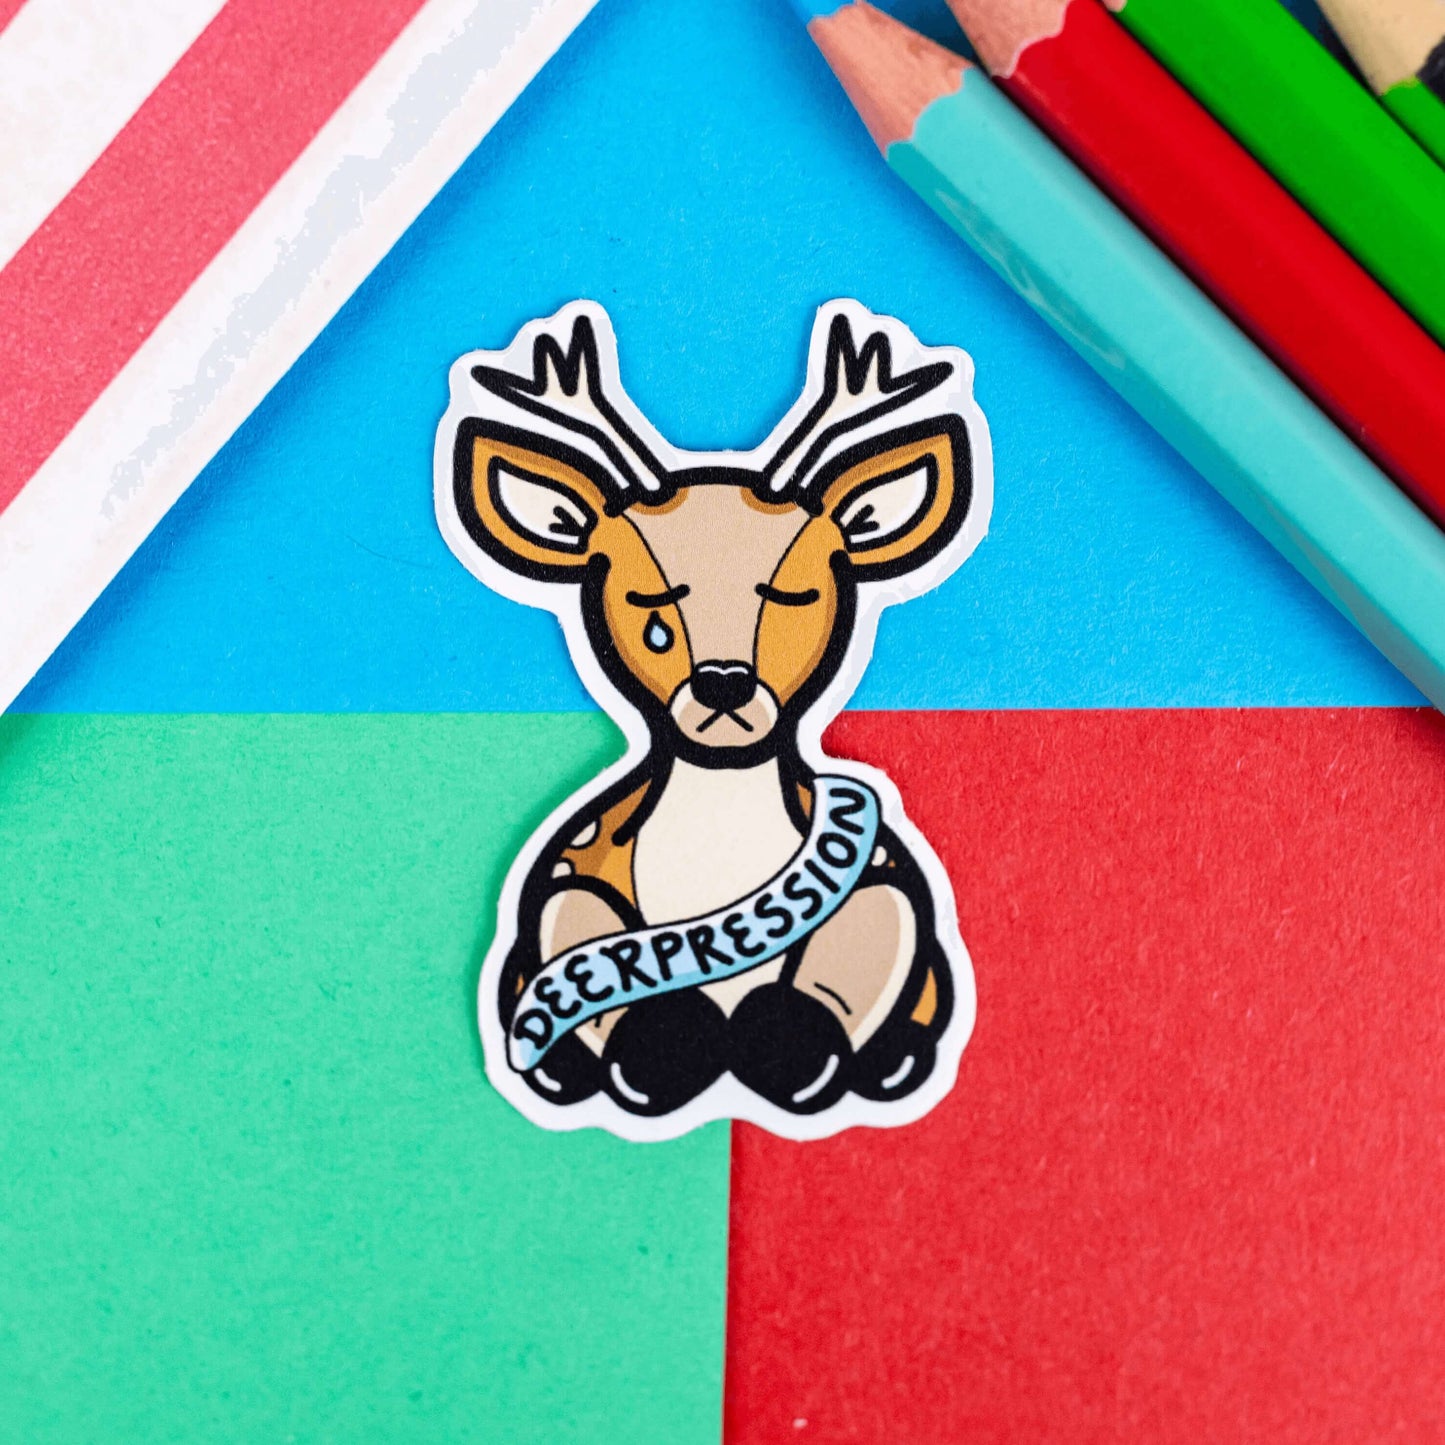 The Deerpression Sticker - Depression on a red, blue and green background with colouring pencils and a red stripe candy bag. The deer shaped sticker has its eyes closed with a tear falling down one cheek, across its middle is a blue banner with black text reading 'deerpression'. The design was created to raise awareness for depression.